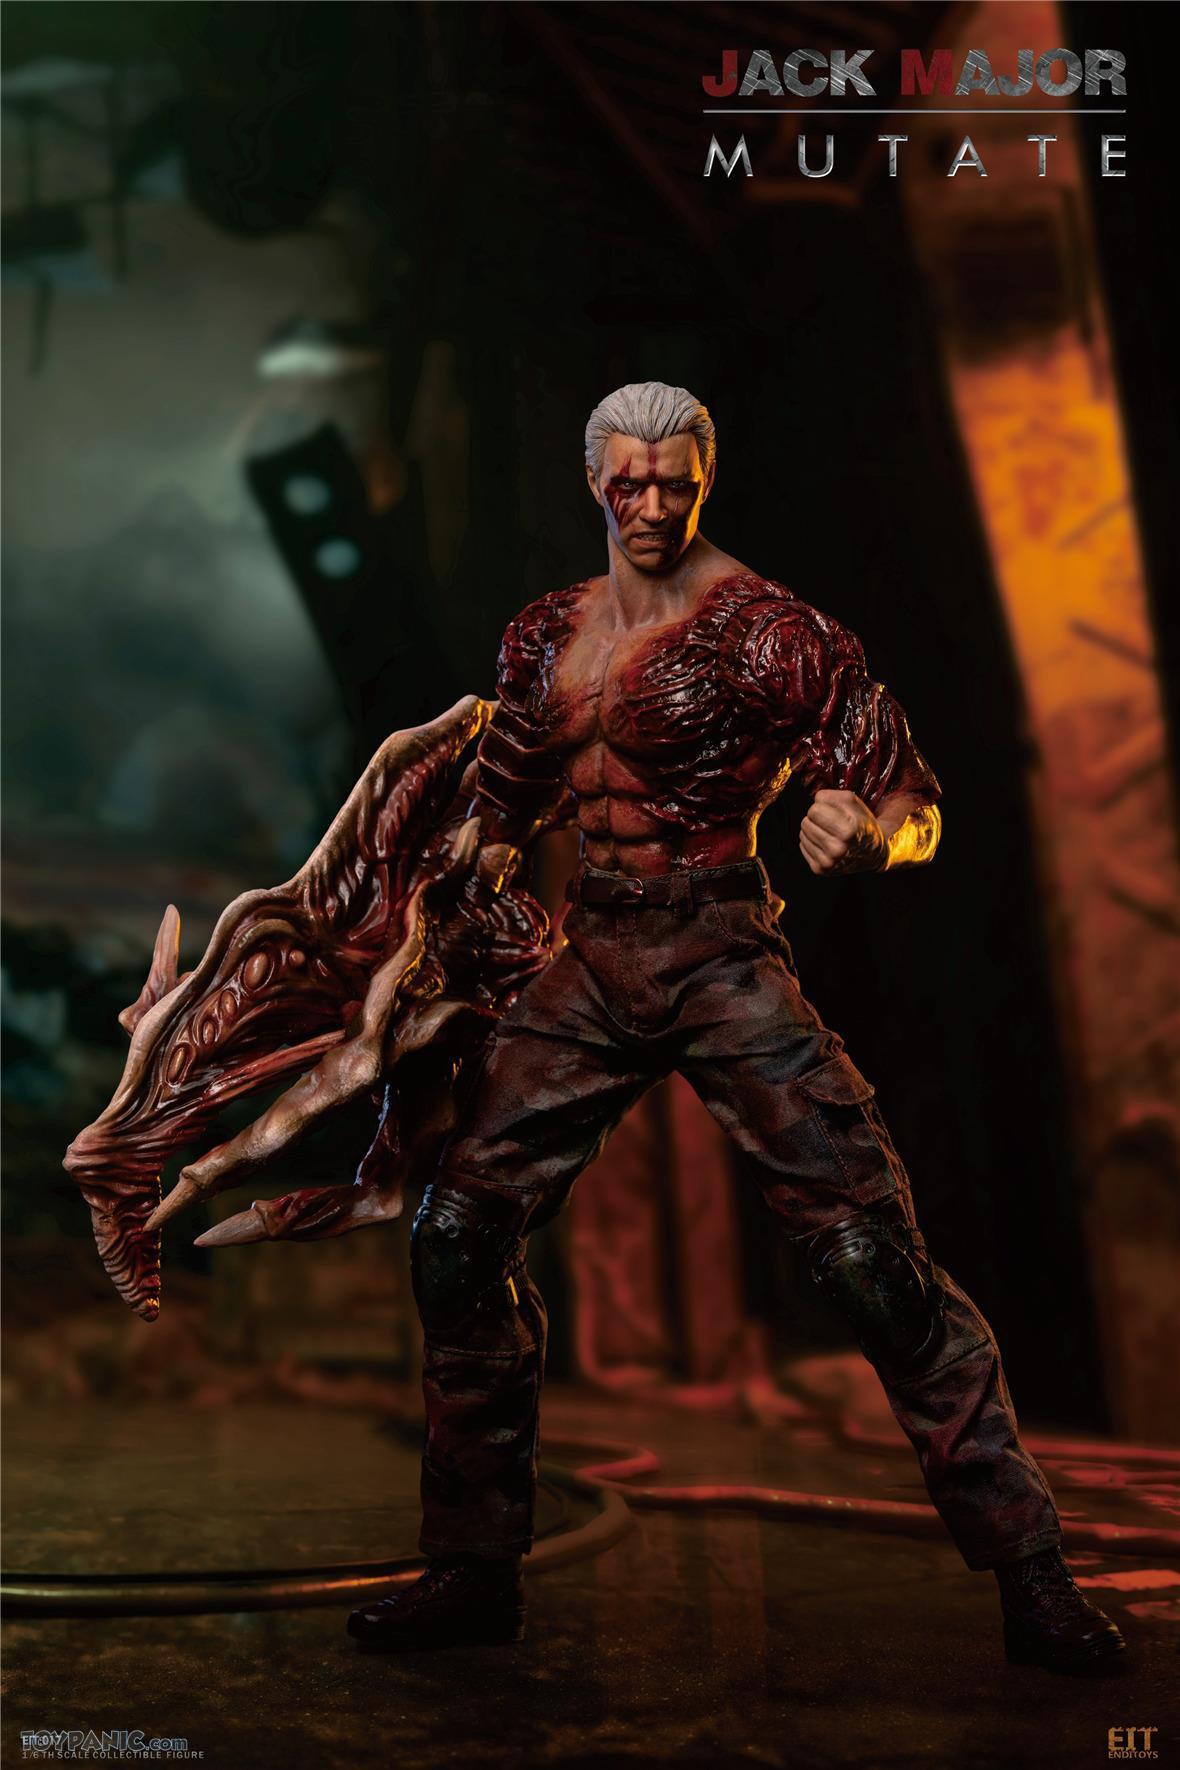 residentevil - NEW PRODUCT:  1/6 Jack Major Mutate from End I Toys  2732024105950AM_6739850